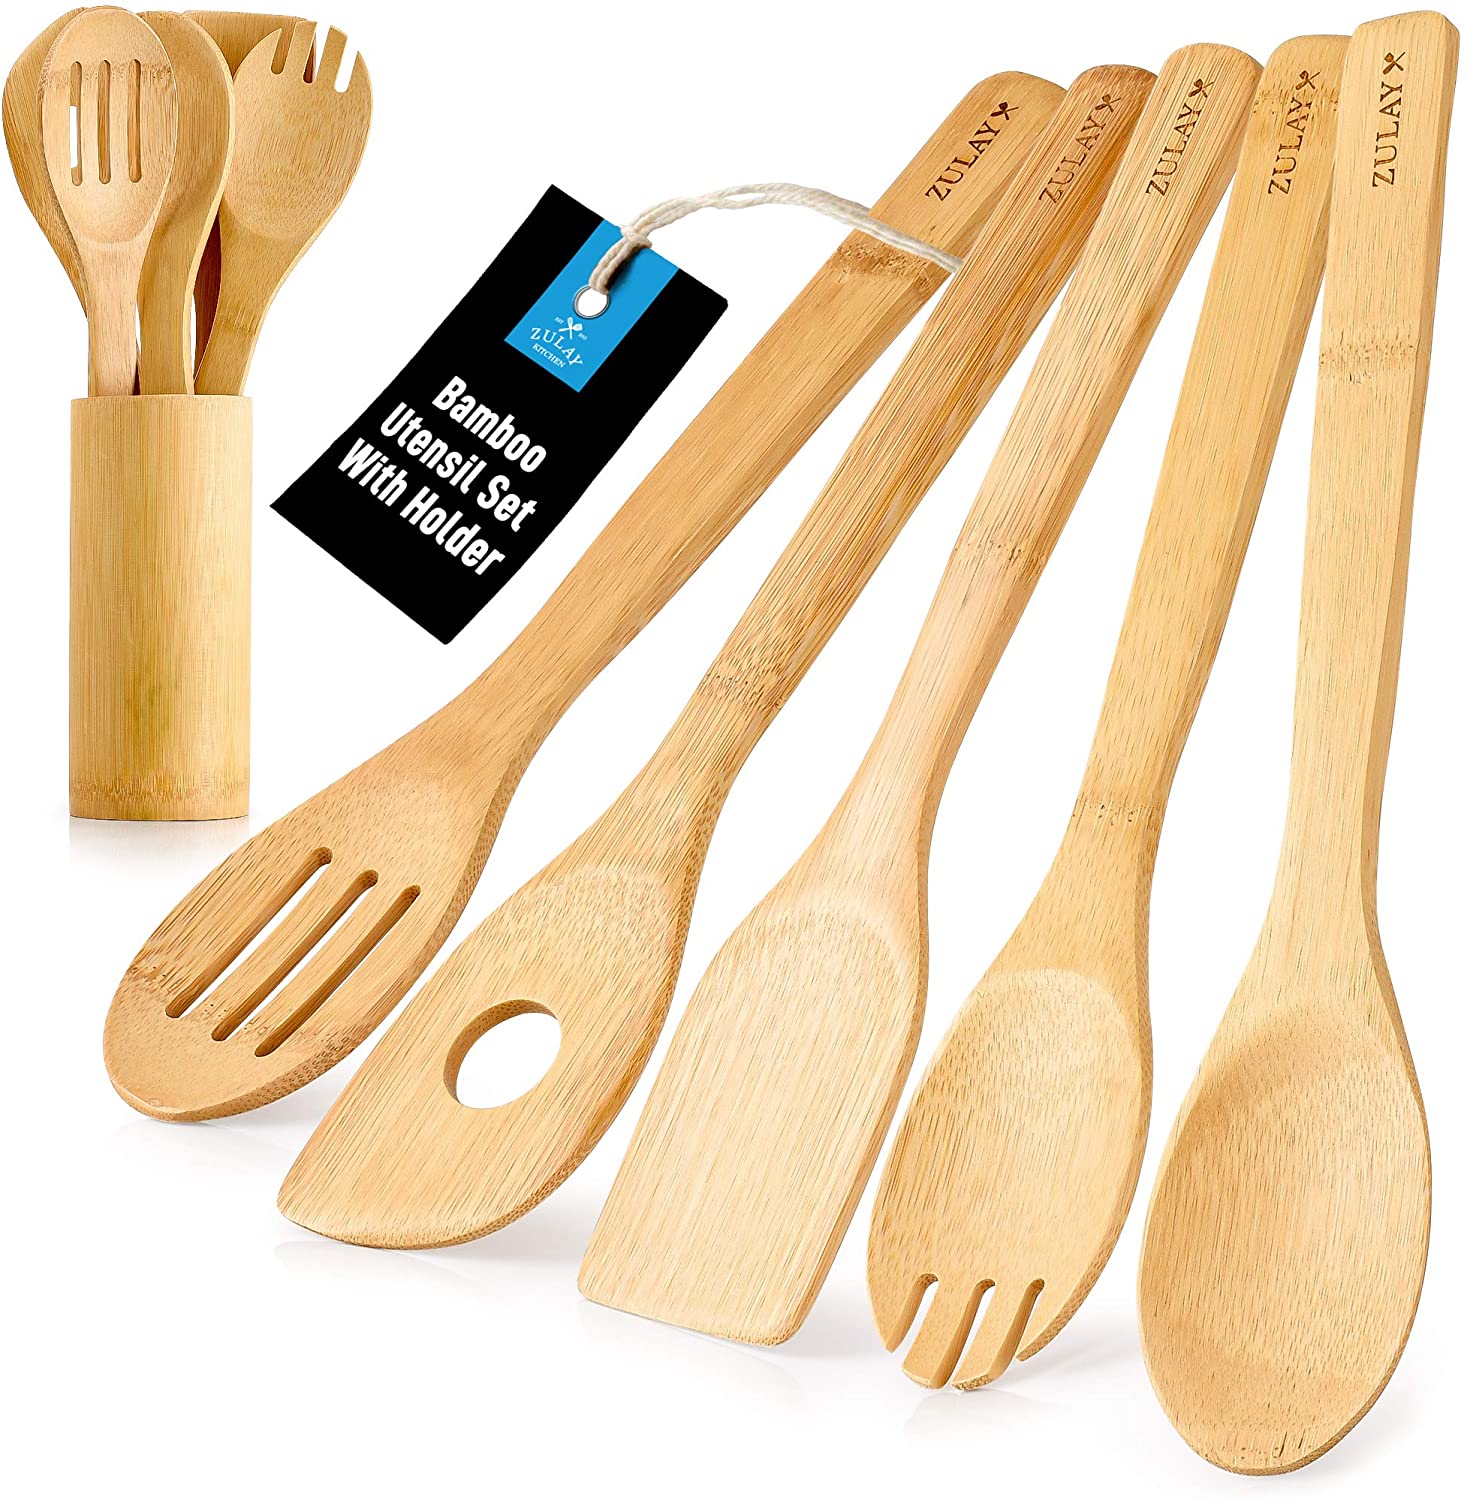 Bamboo Cooking Utensils With Holder (6 Piece) - Zulay KitchenZulay Kitchen